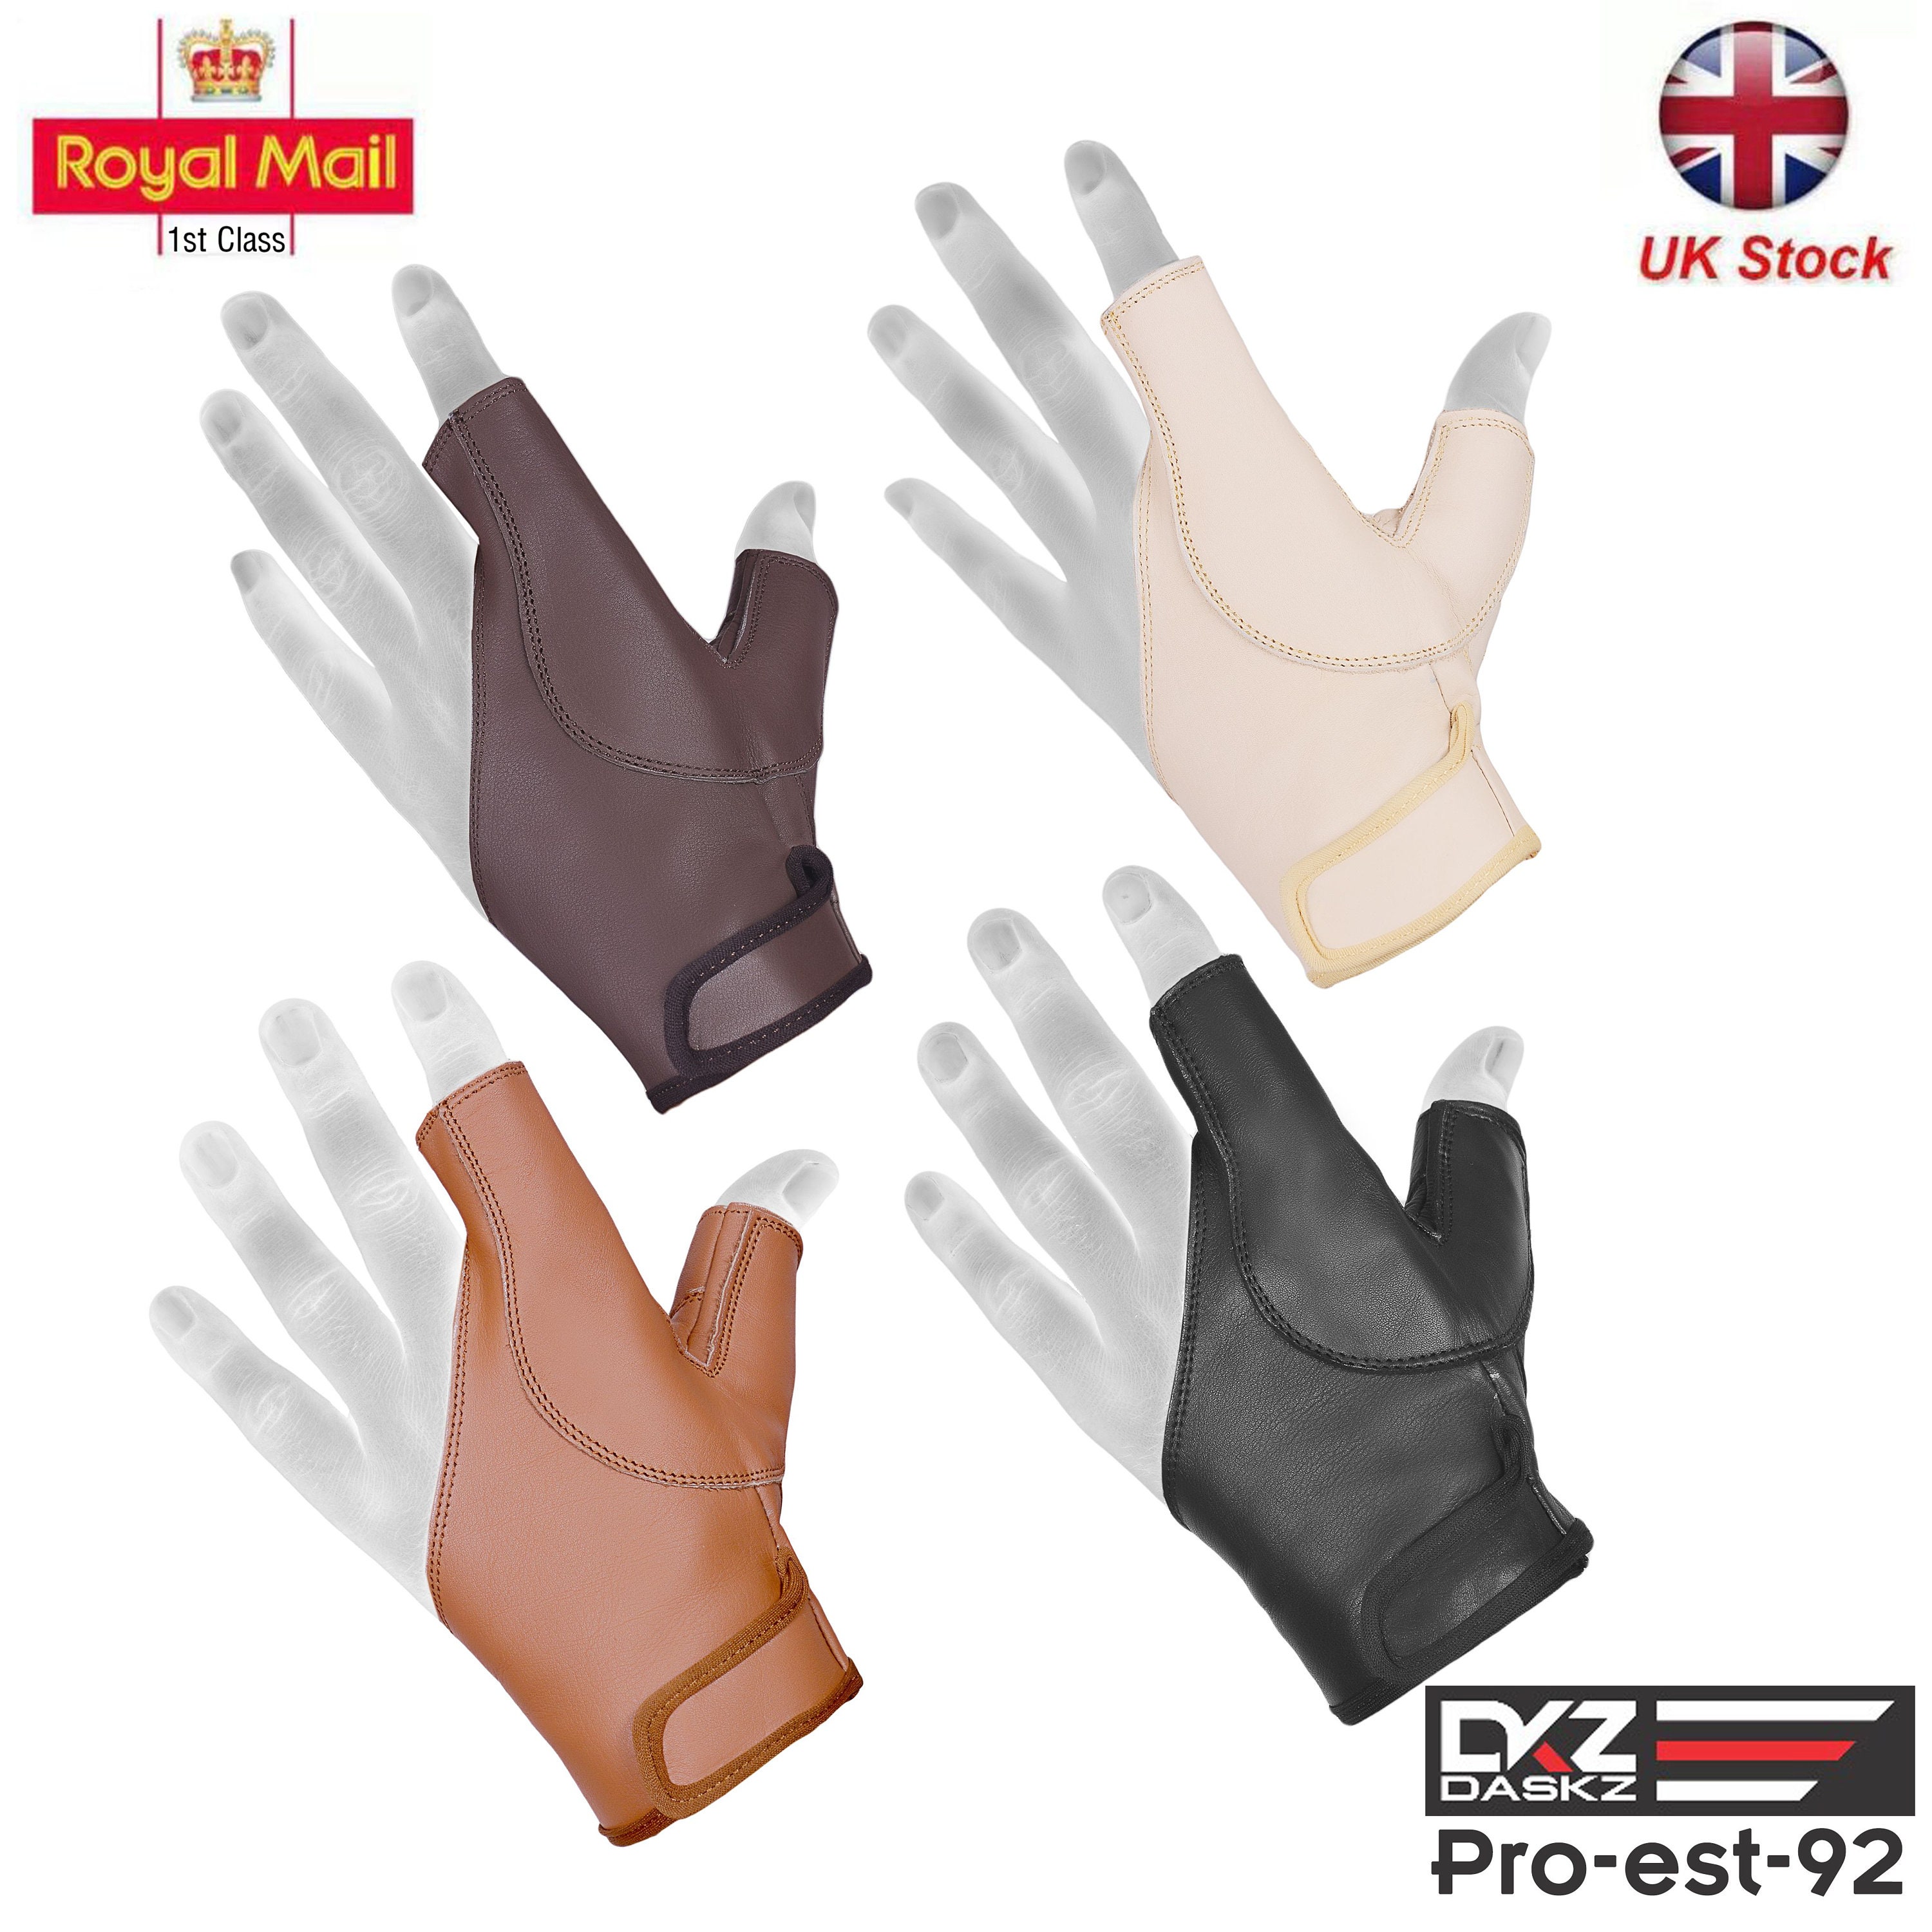 LEFT HAND GLOVE CHOCOLATE BROWN LEATHER SHOOTING 4 FINGER GLOVE ARCHERS 